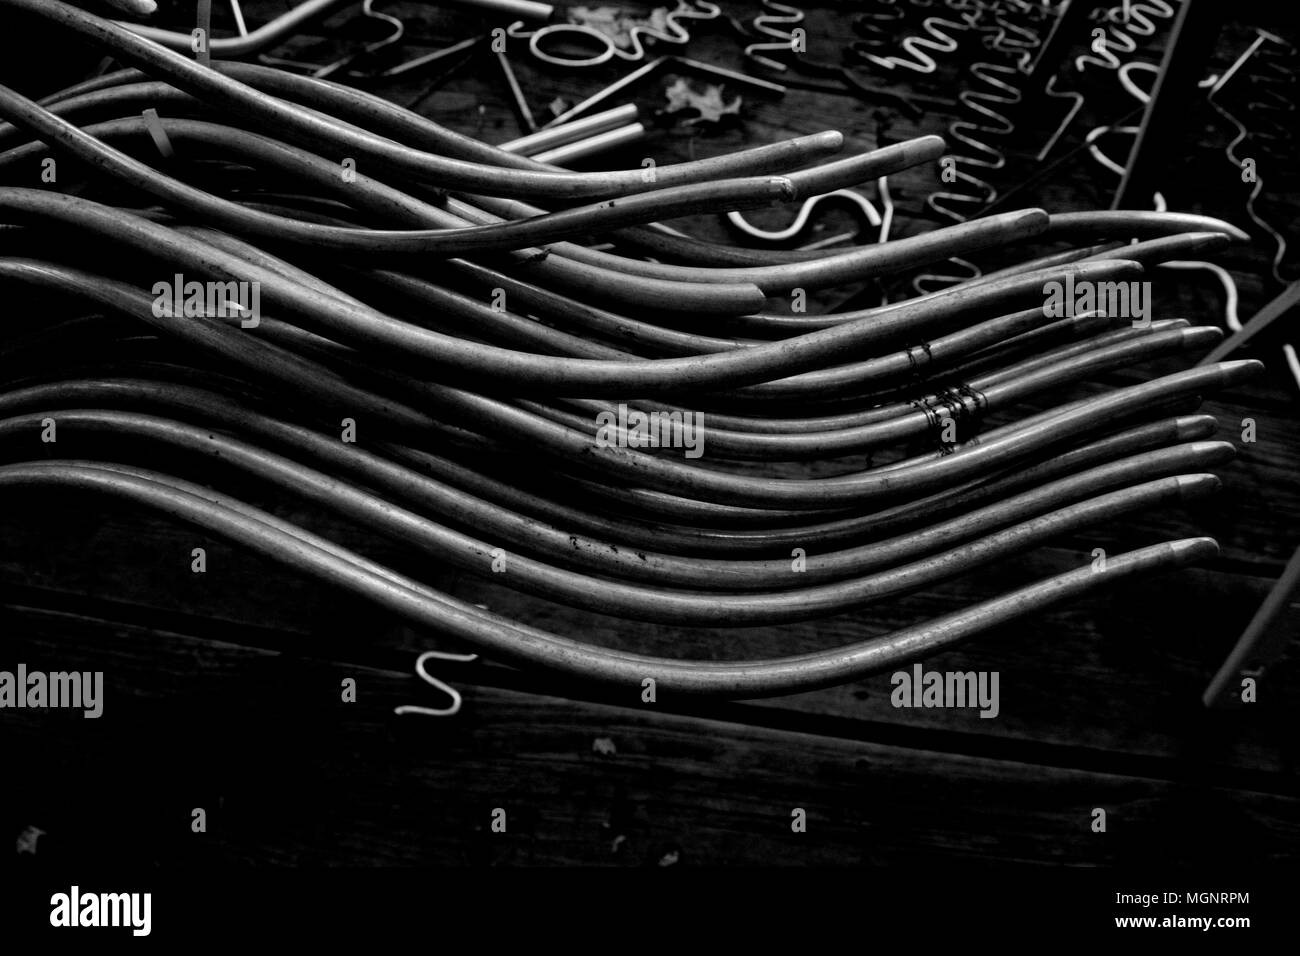 Black and White Metal Alloy Curves on Wooden Bench Stock Photo